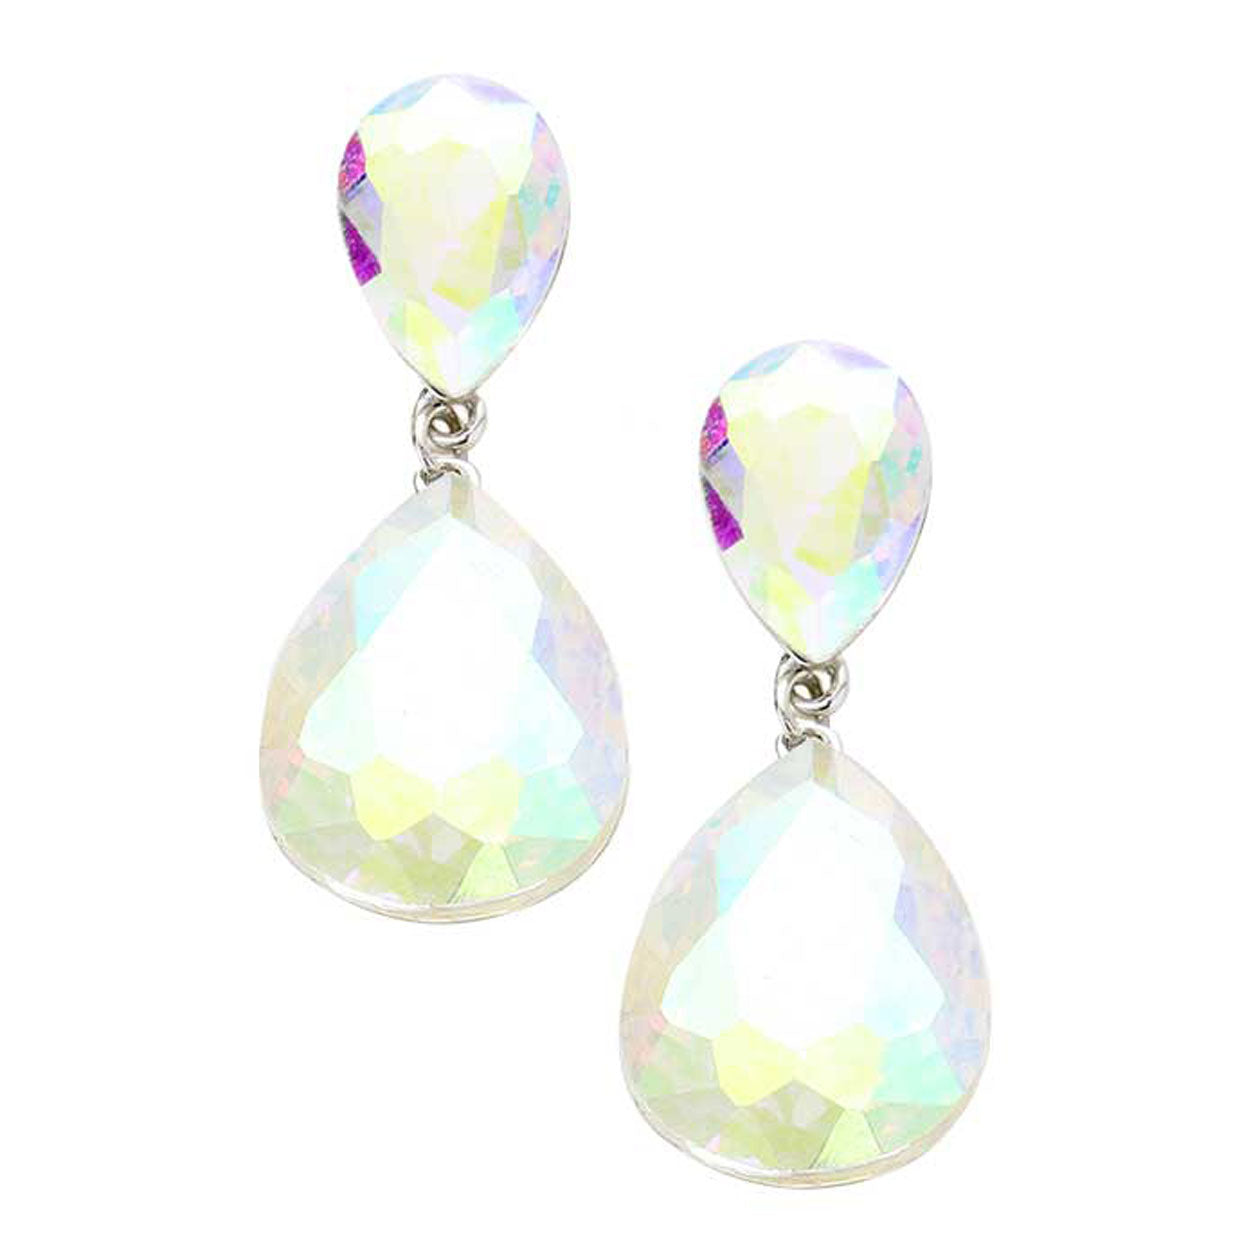 Rhodium Glass Crystal Teardrop Evening Earrings. This evening earring is simple and cute, easy to match any hairstyles and clothes. Suitable for both daily wear and party dress. Great choice to treat yourself and This earrings is perfect for Holiday gift, Anniversary gift, Birthday gift, Valentine's Day gift for a woman or girl of any age.